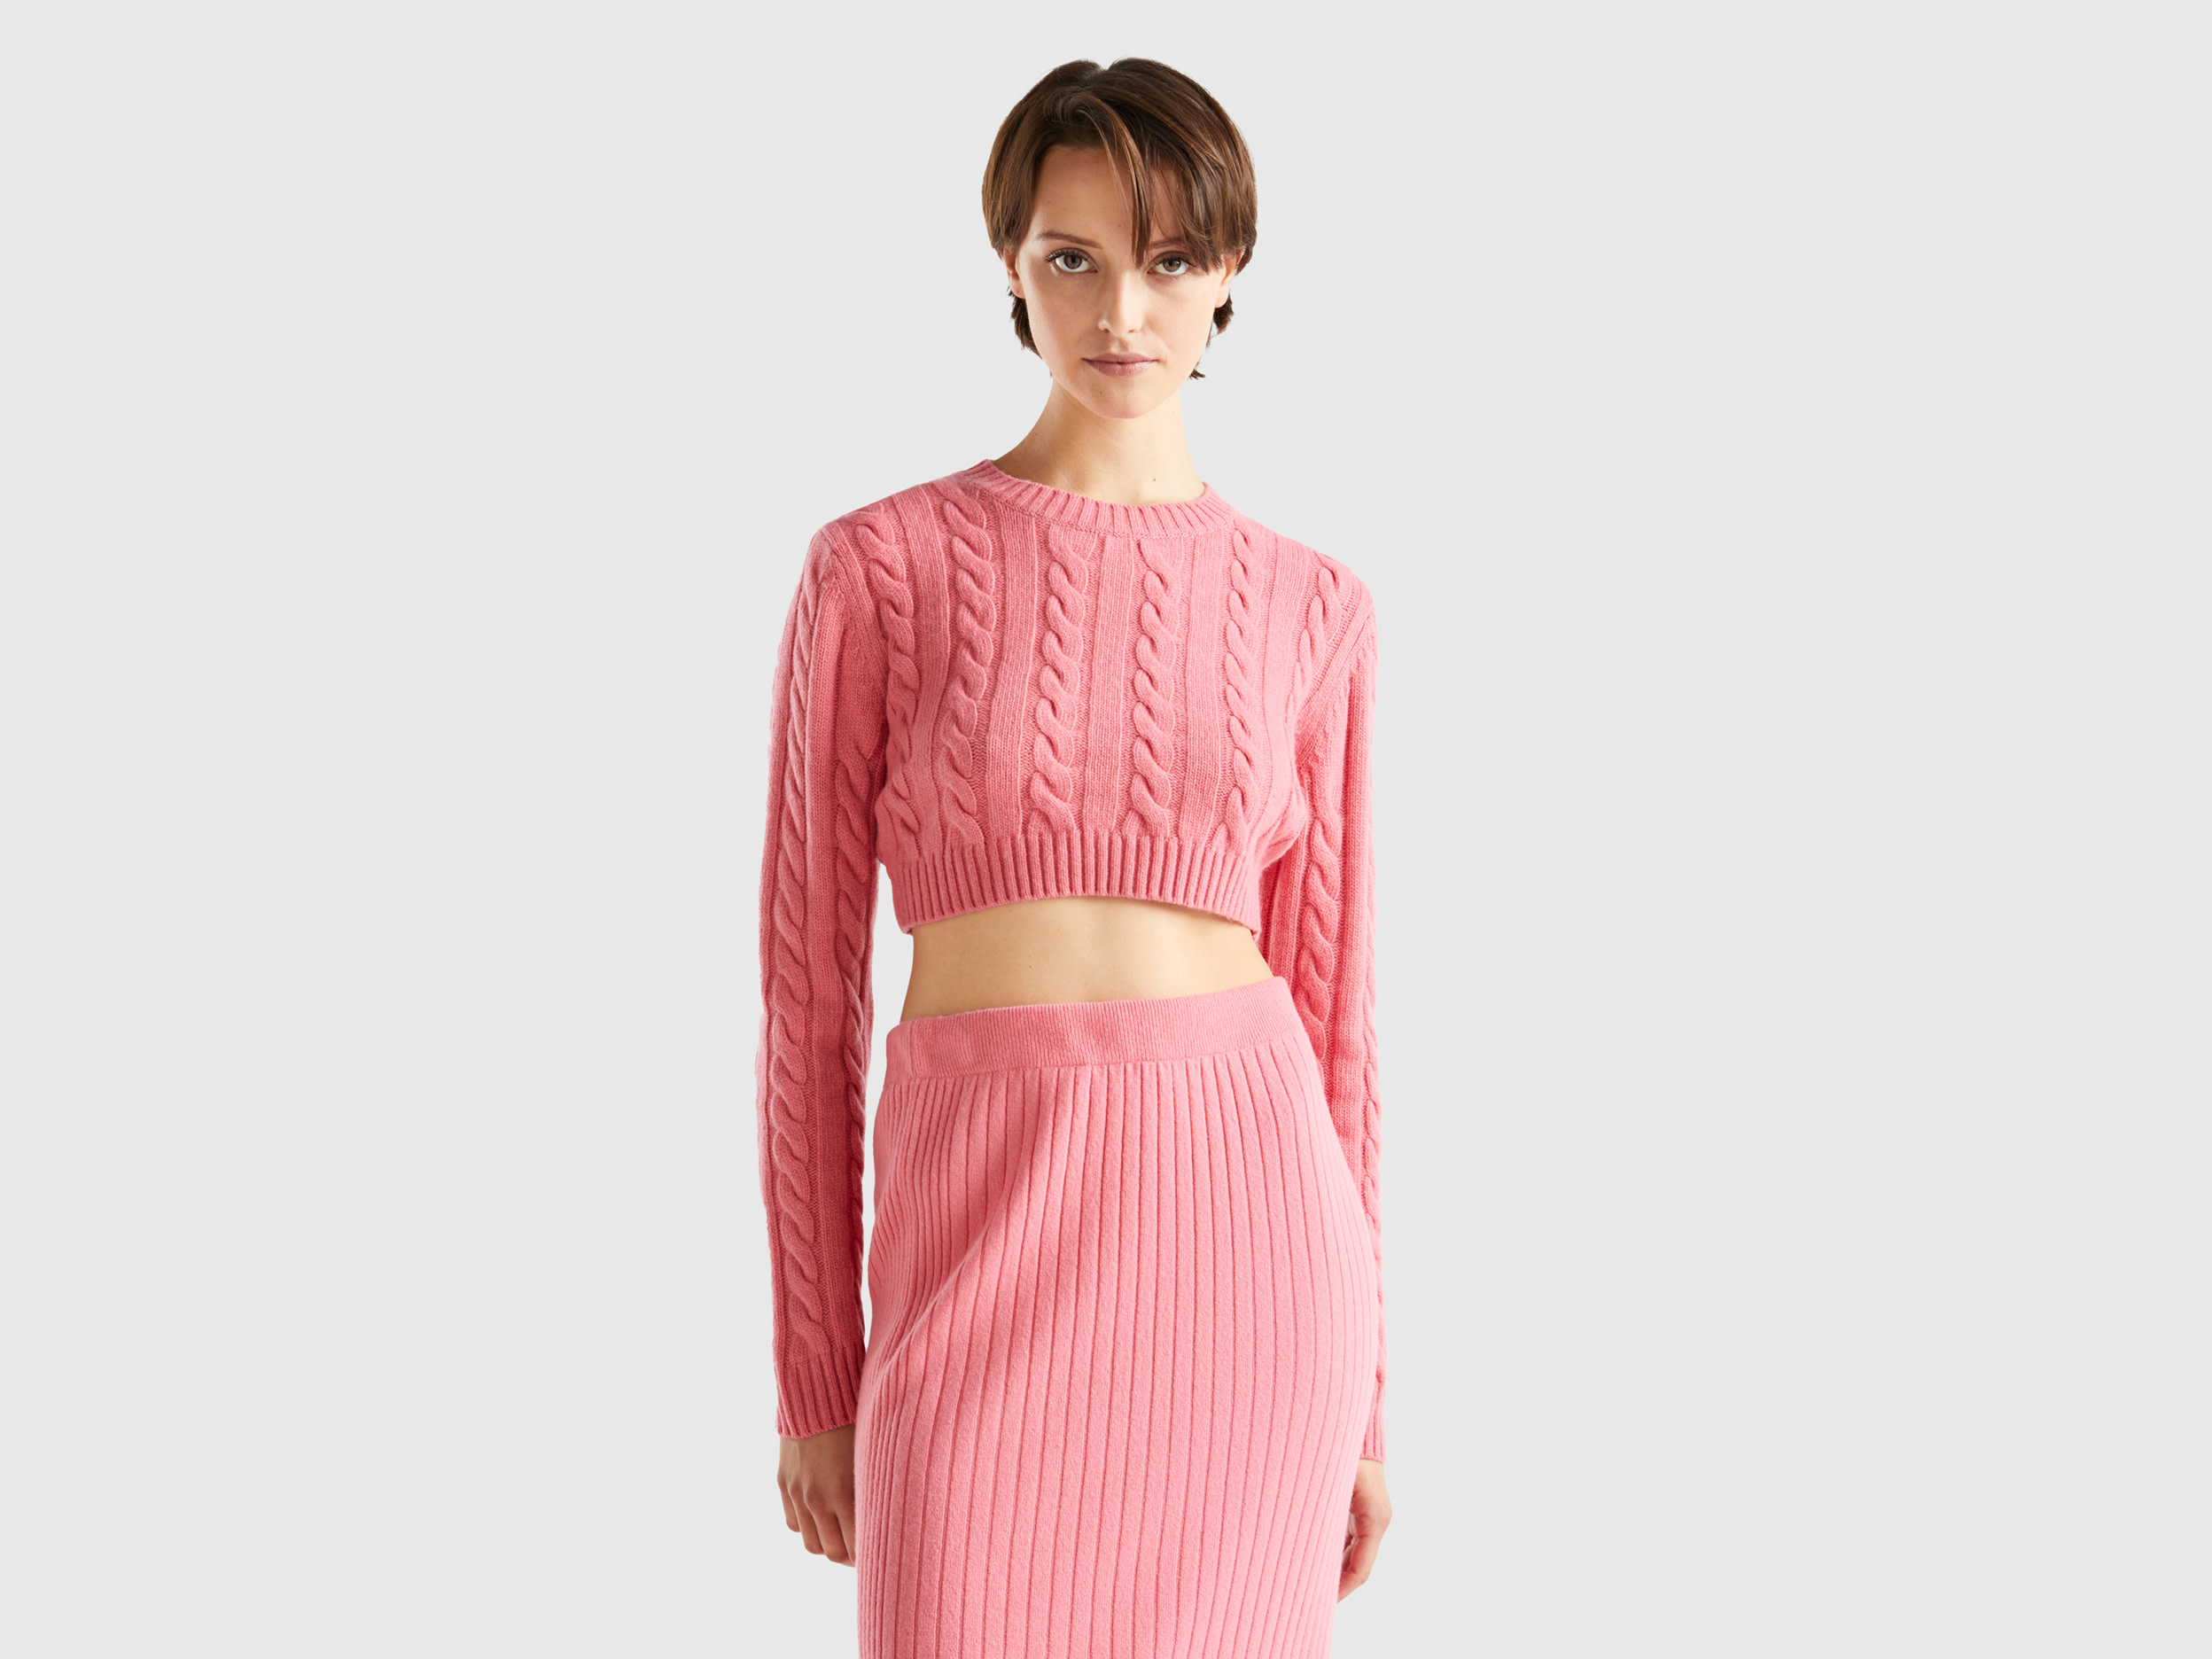 Benetton, Cropped Sweater With Cables, size S, Pink, Women